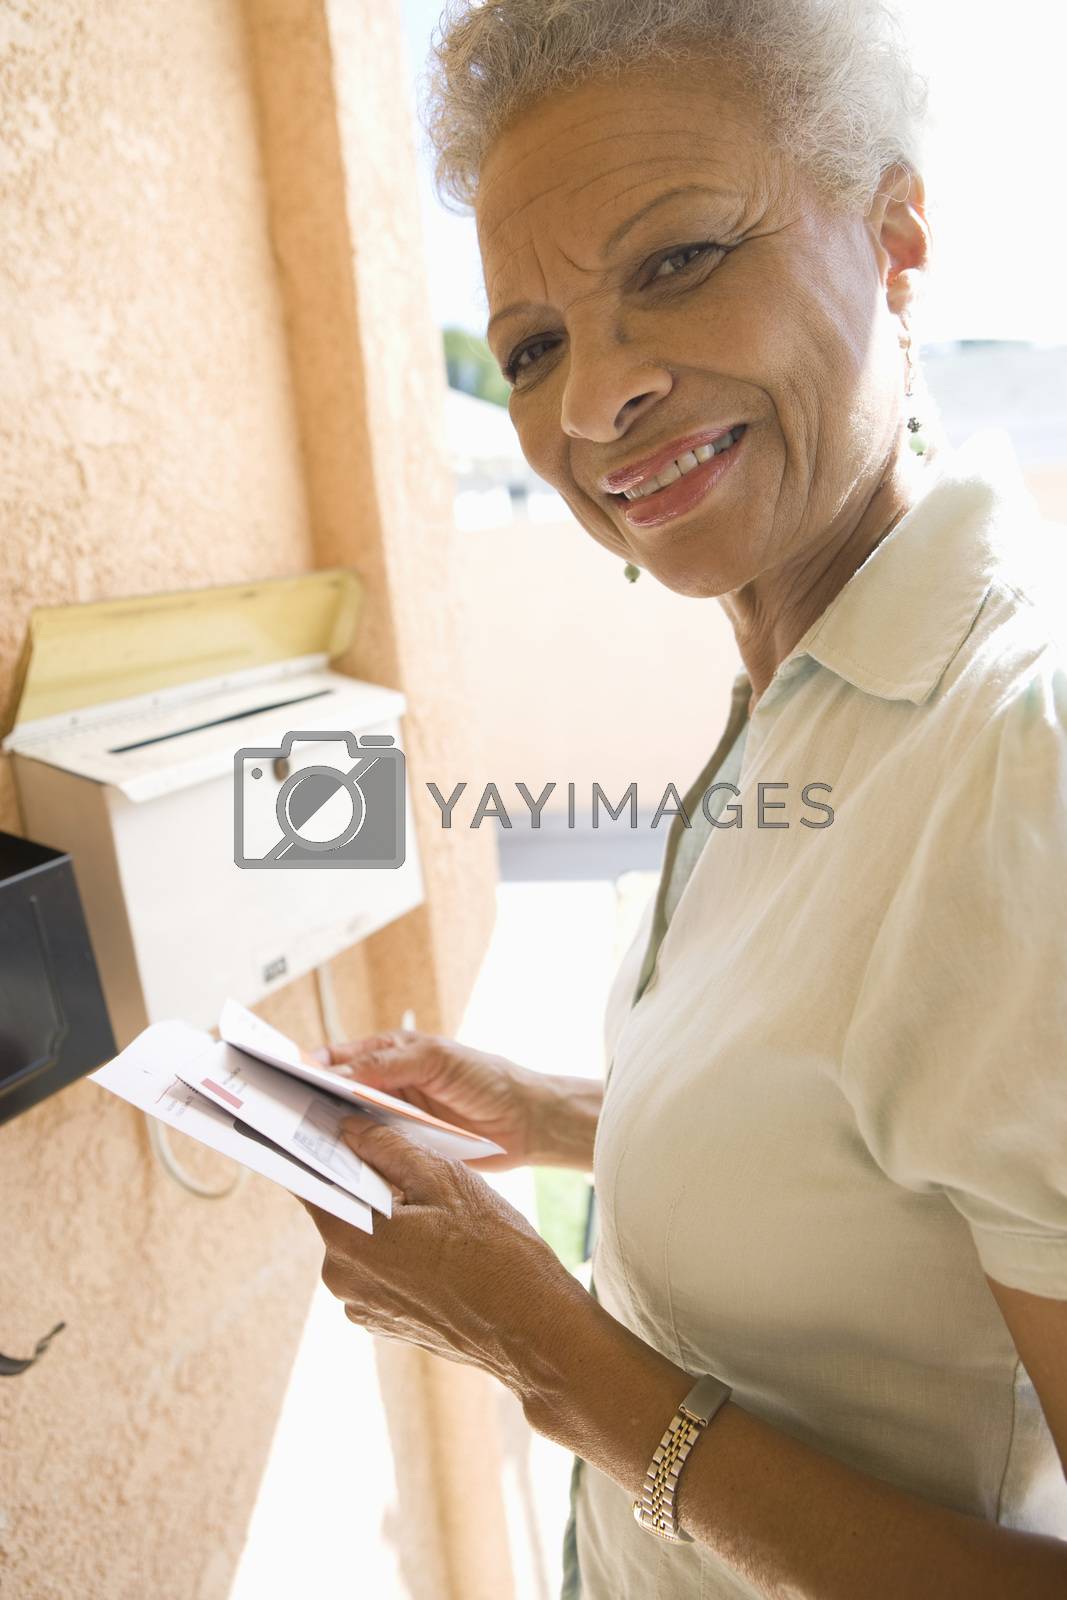 Royalty free image of Woman collecting mail from letterbox by moodboard